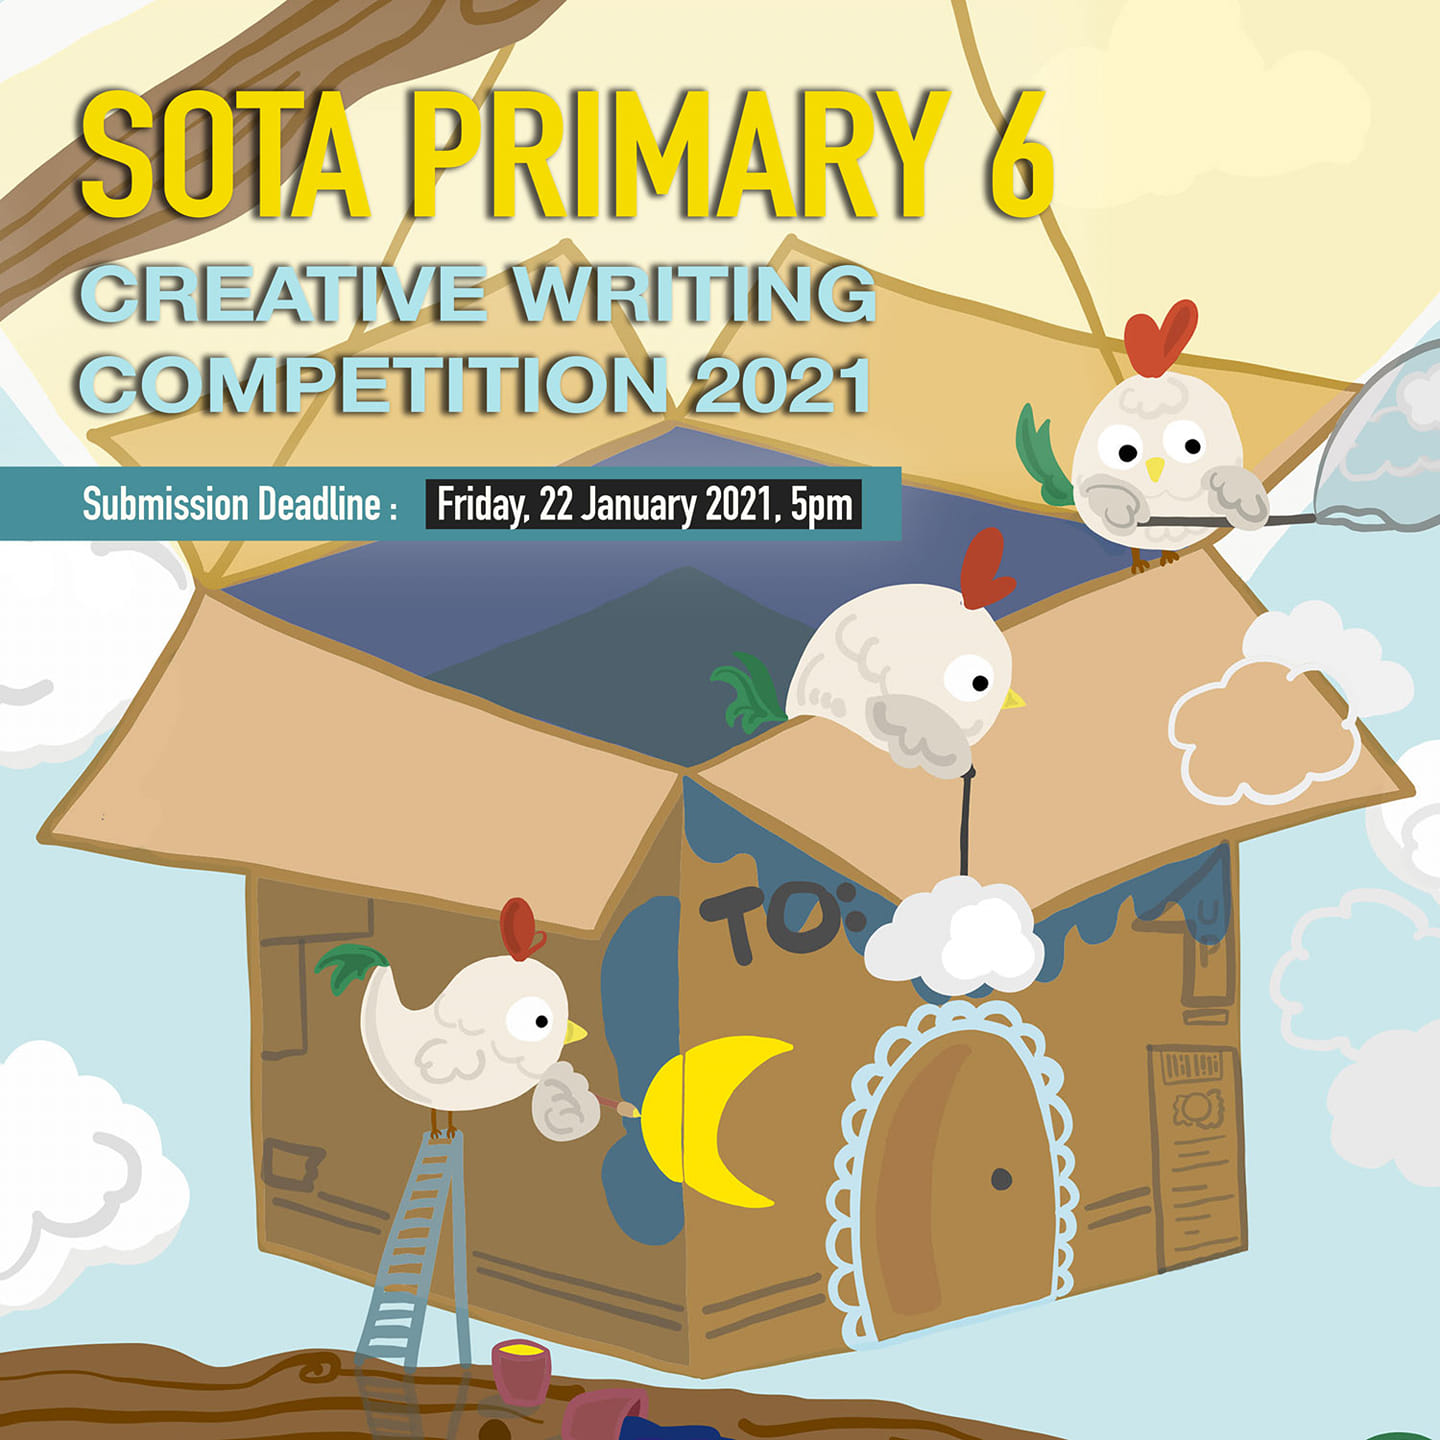 sota creative writing competition 2021